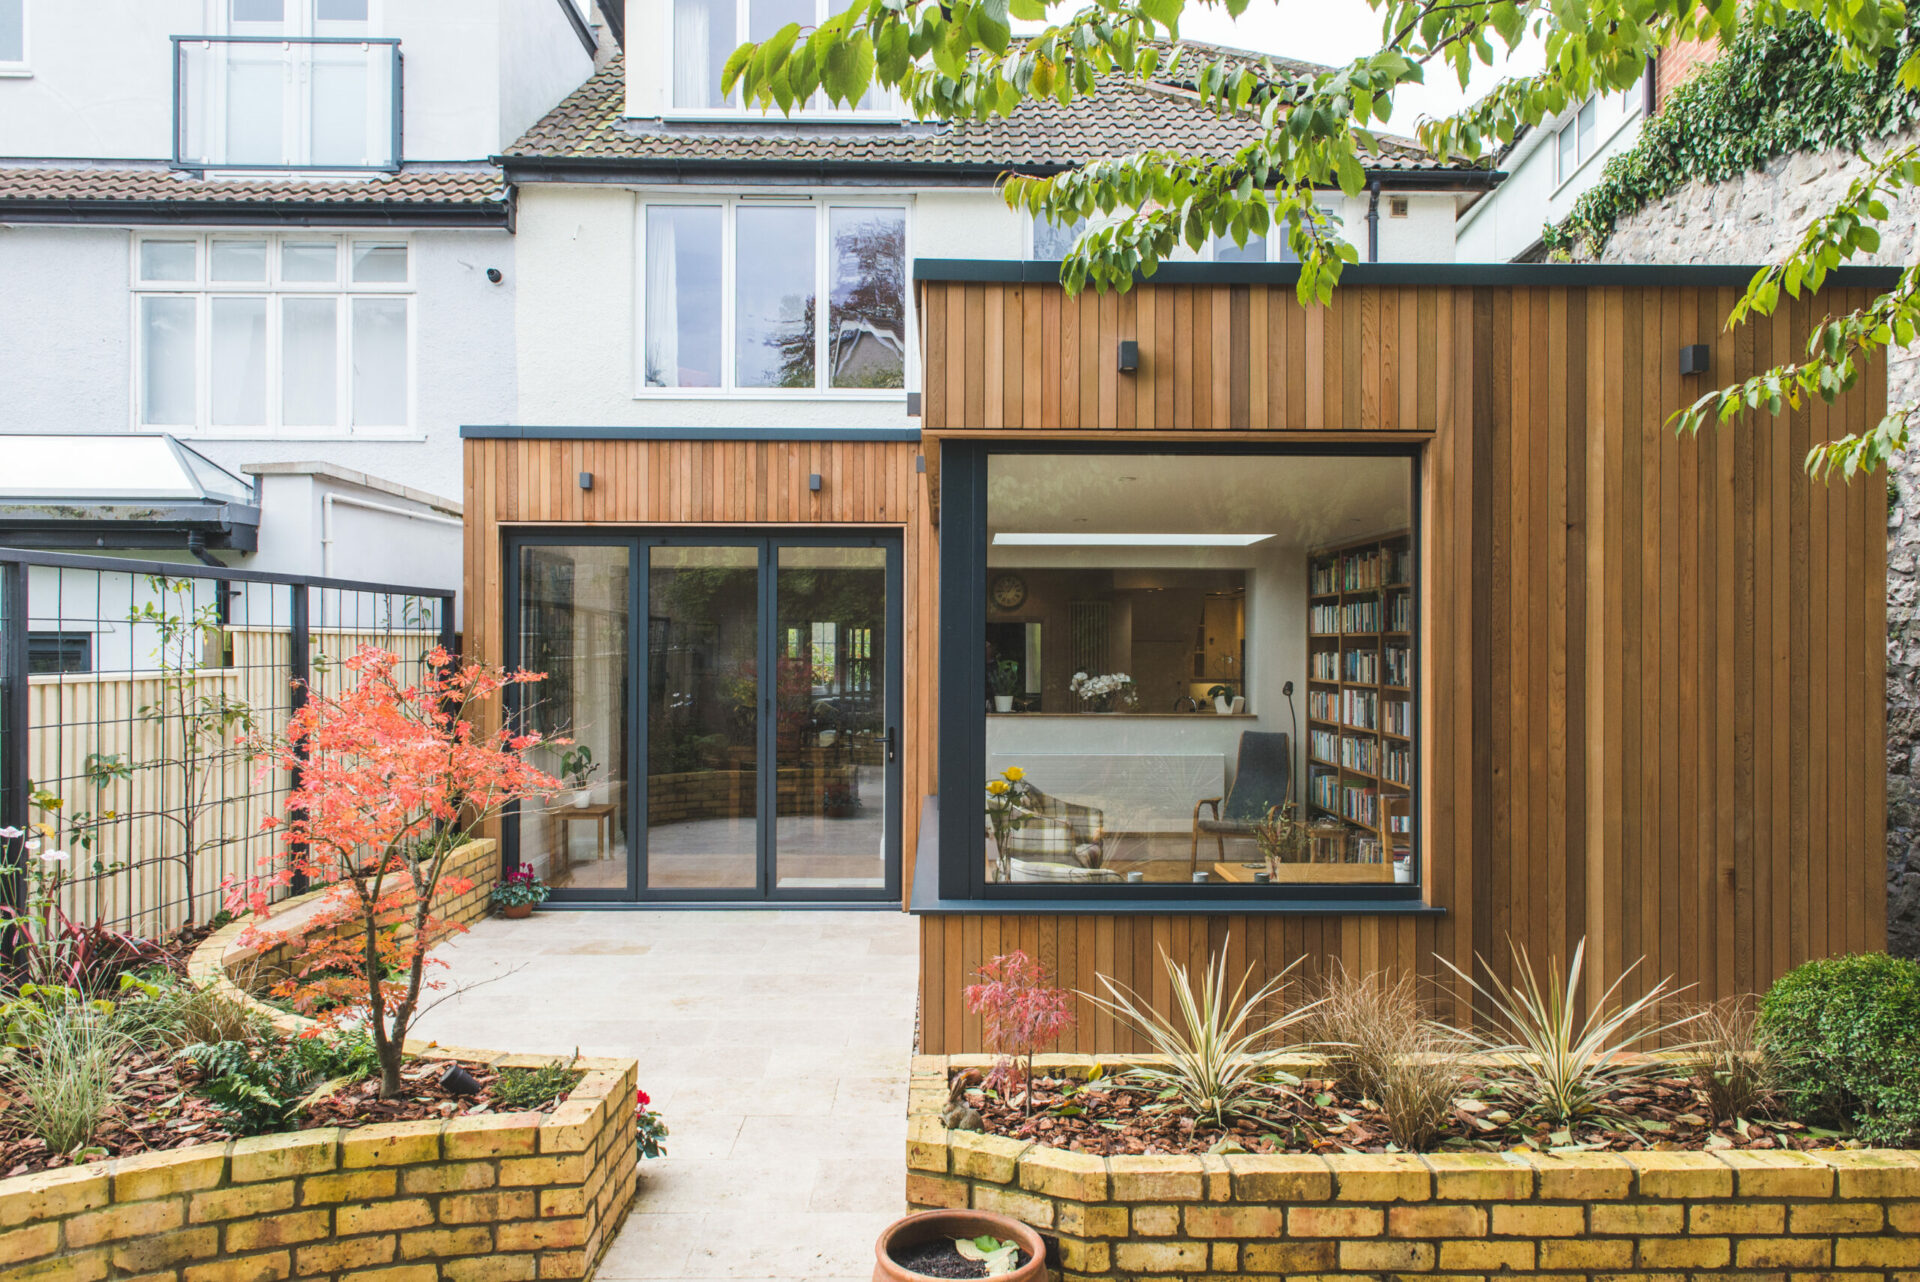 Contemporary timber clad extension